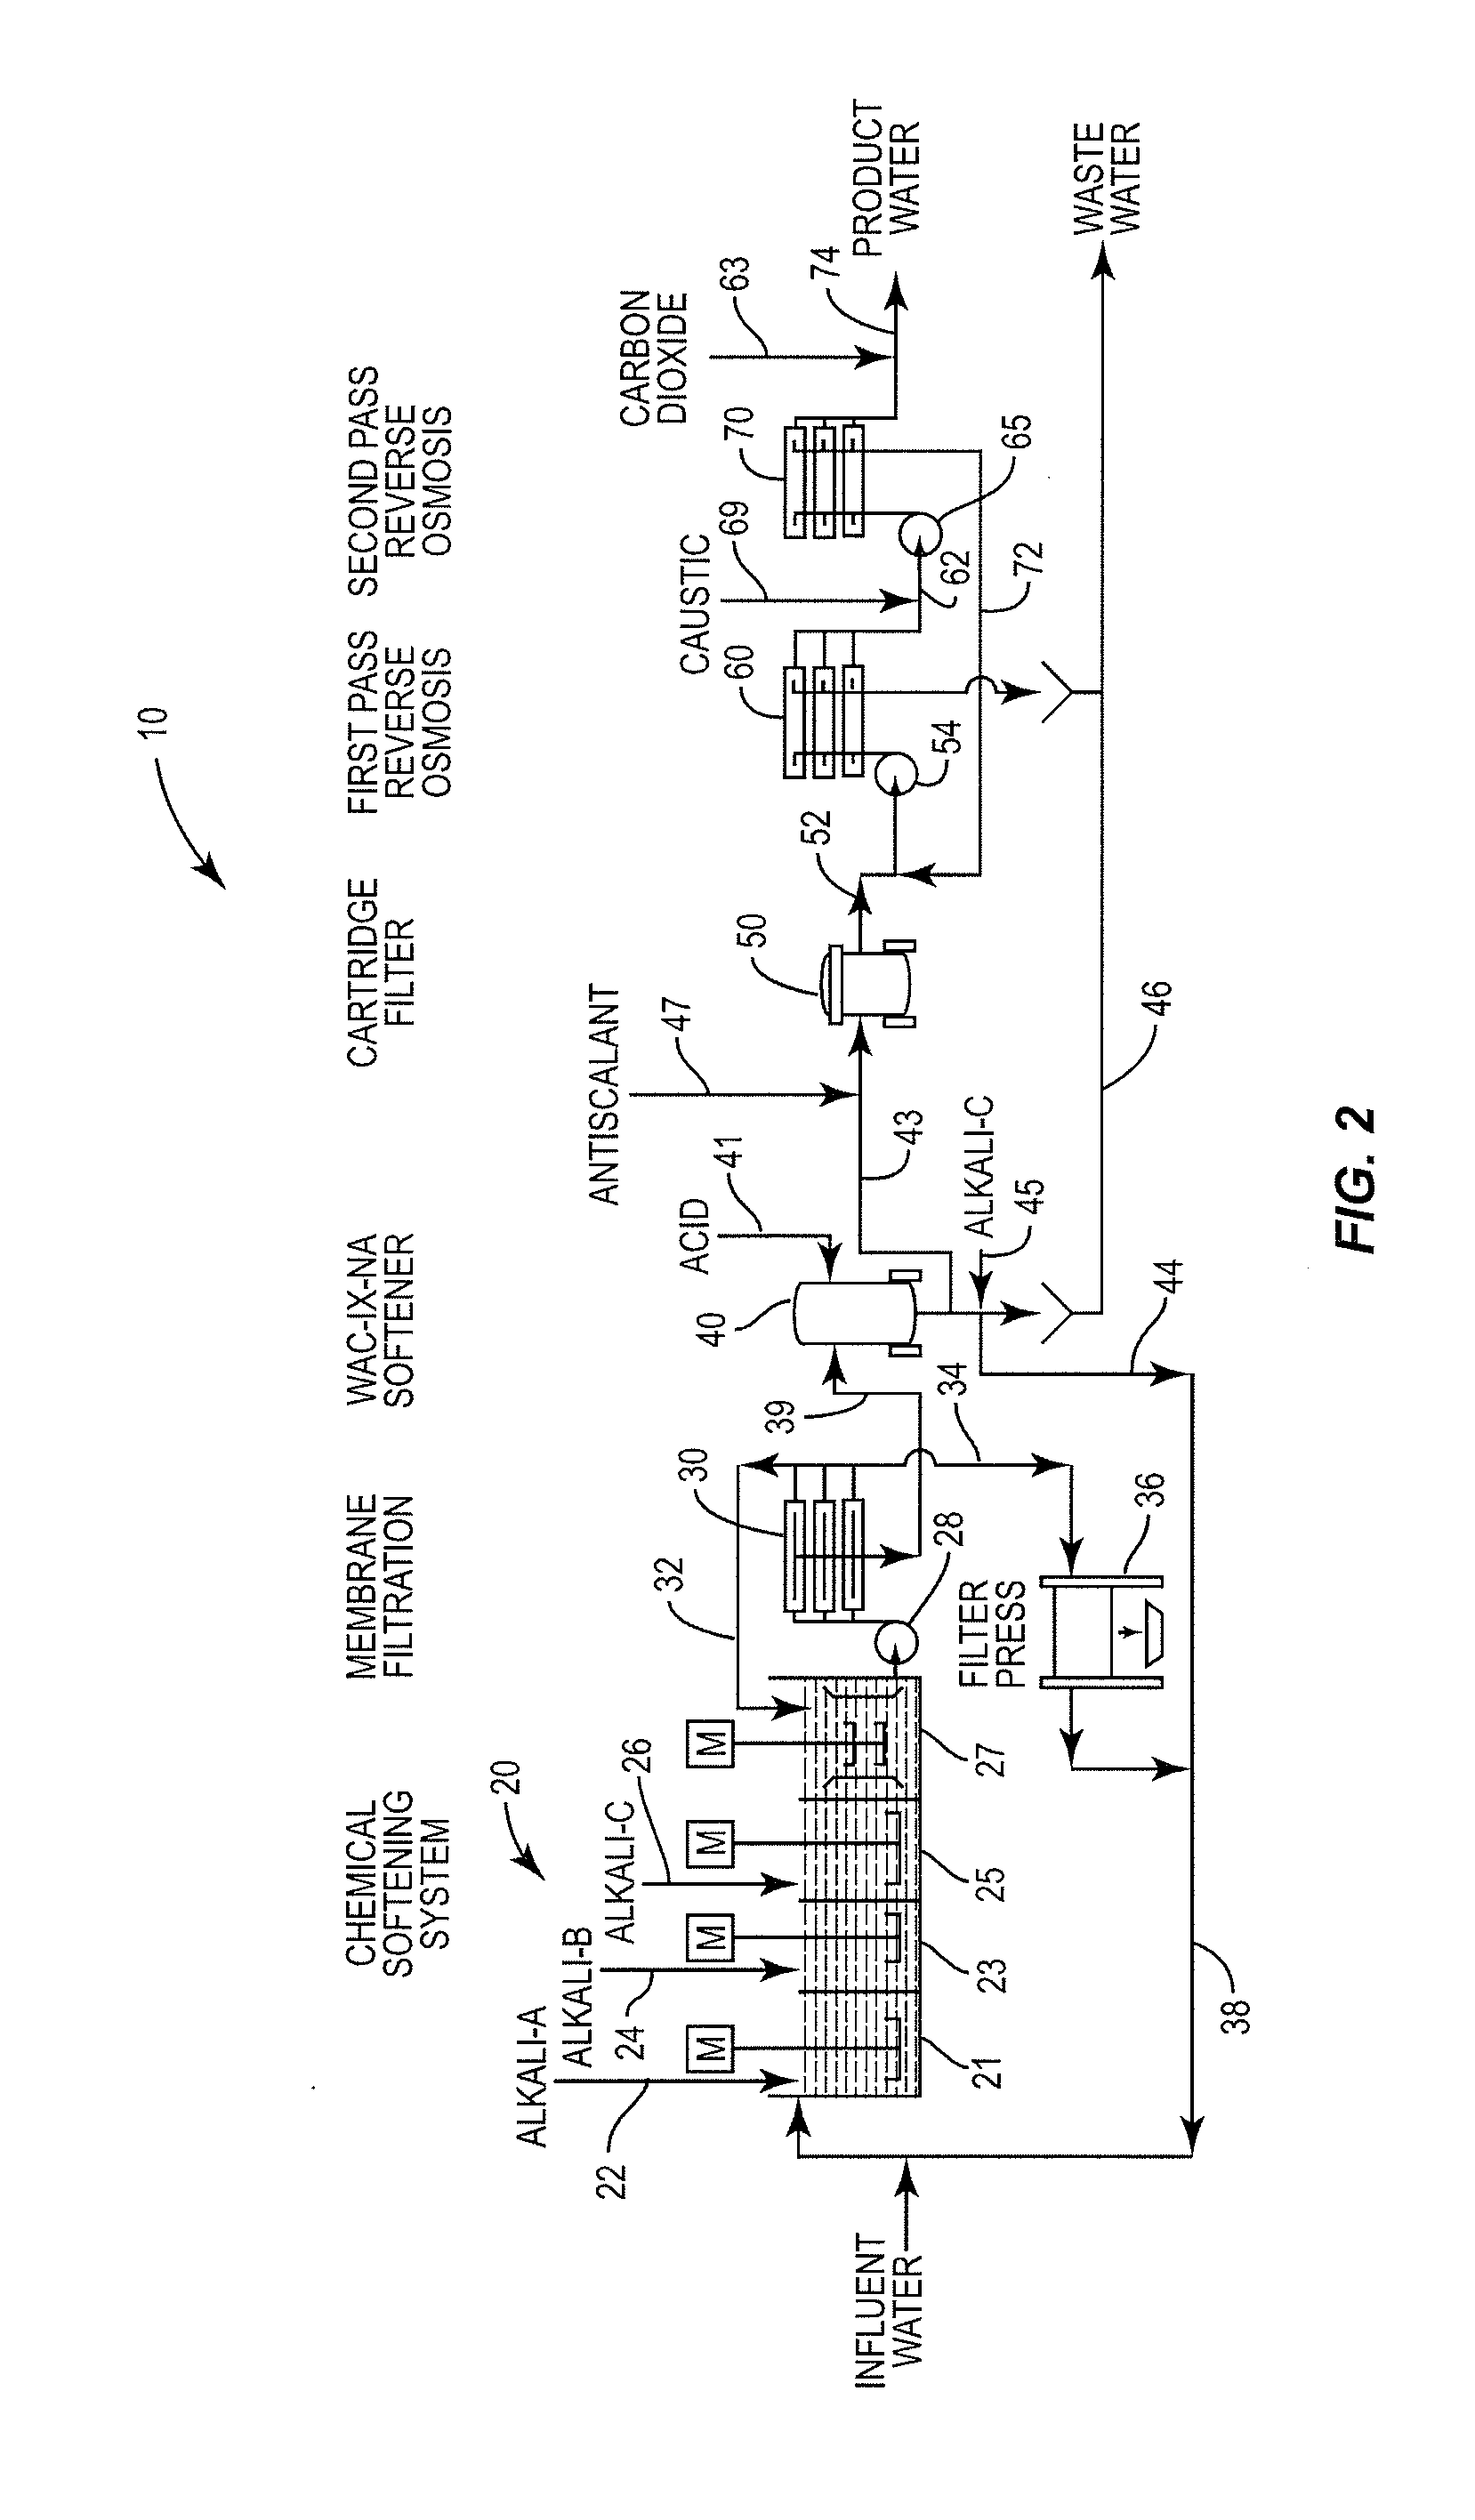 Method of Recovering Oil or Gas and Treating the Resulting Produced Water